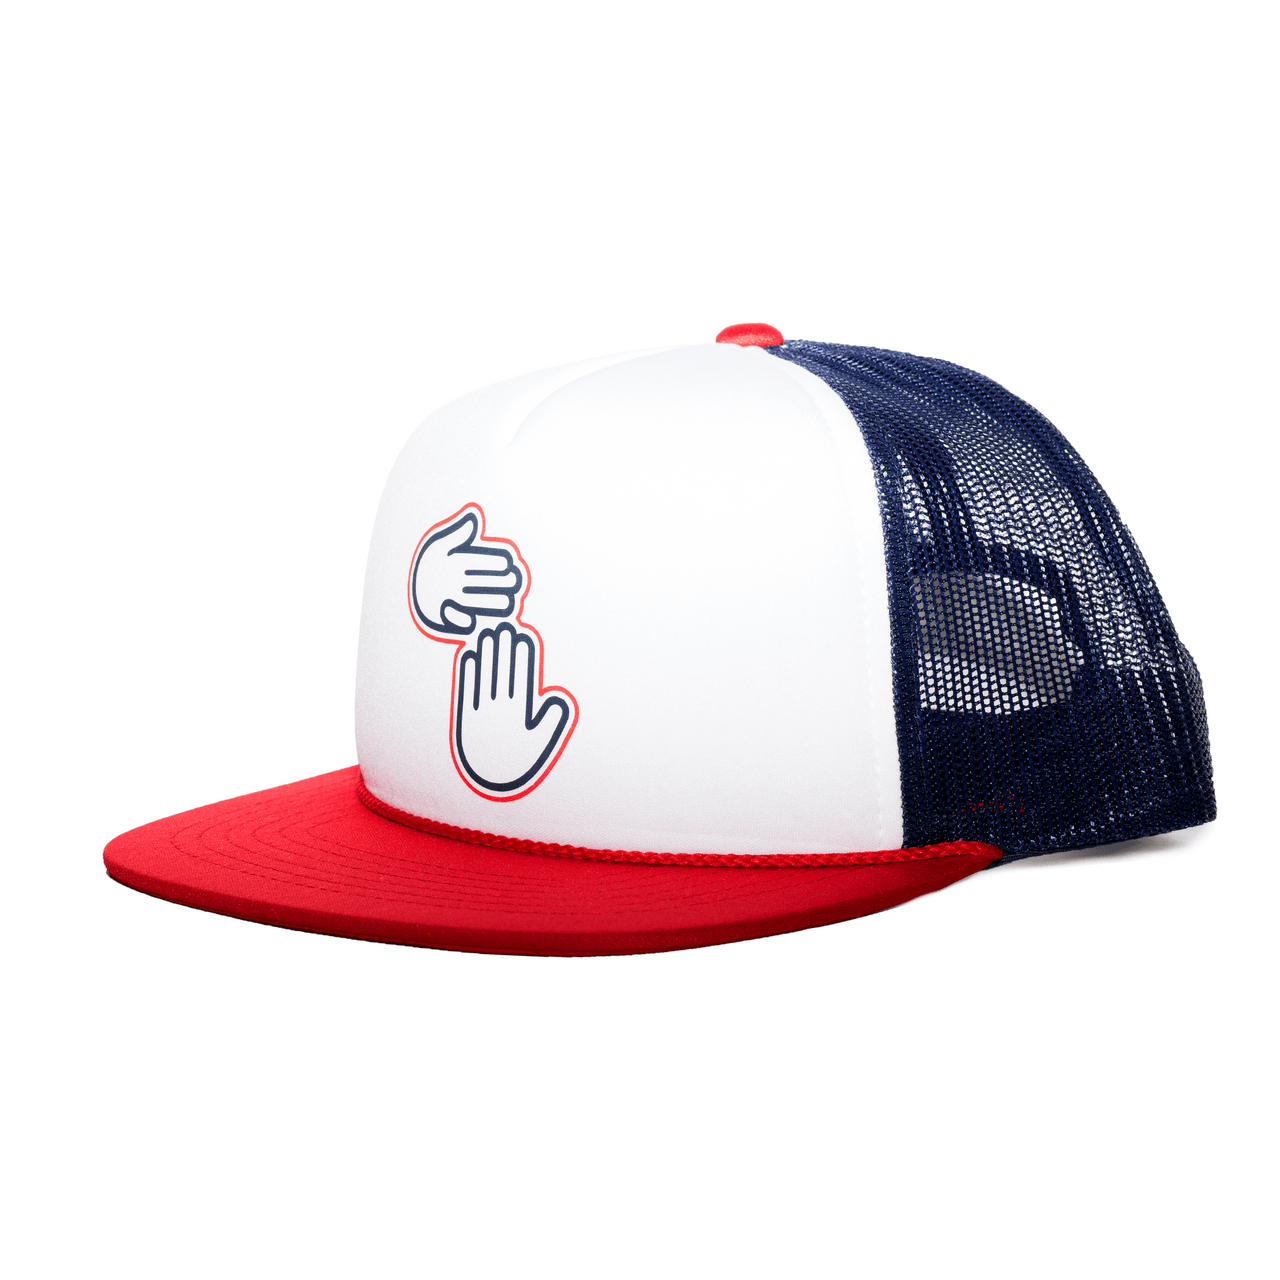 Red, White and Blue Trucker